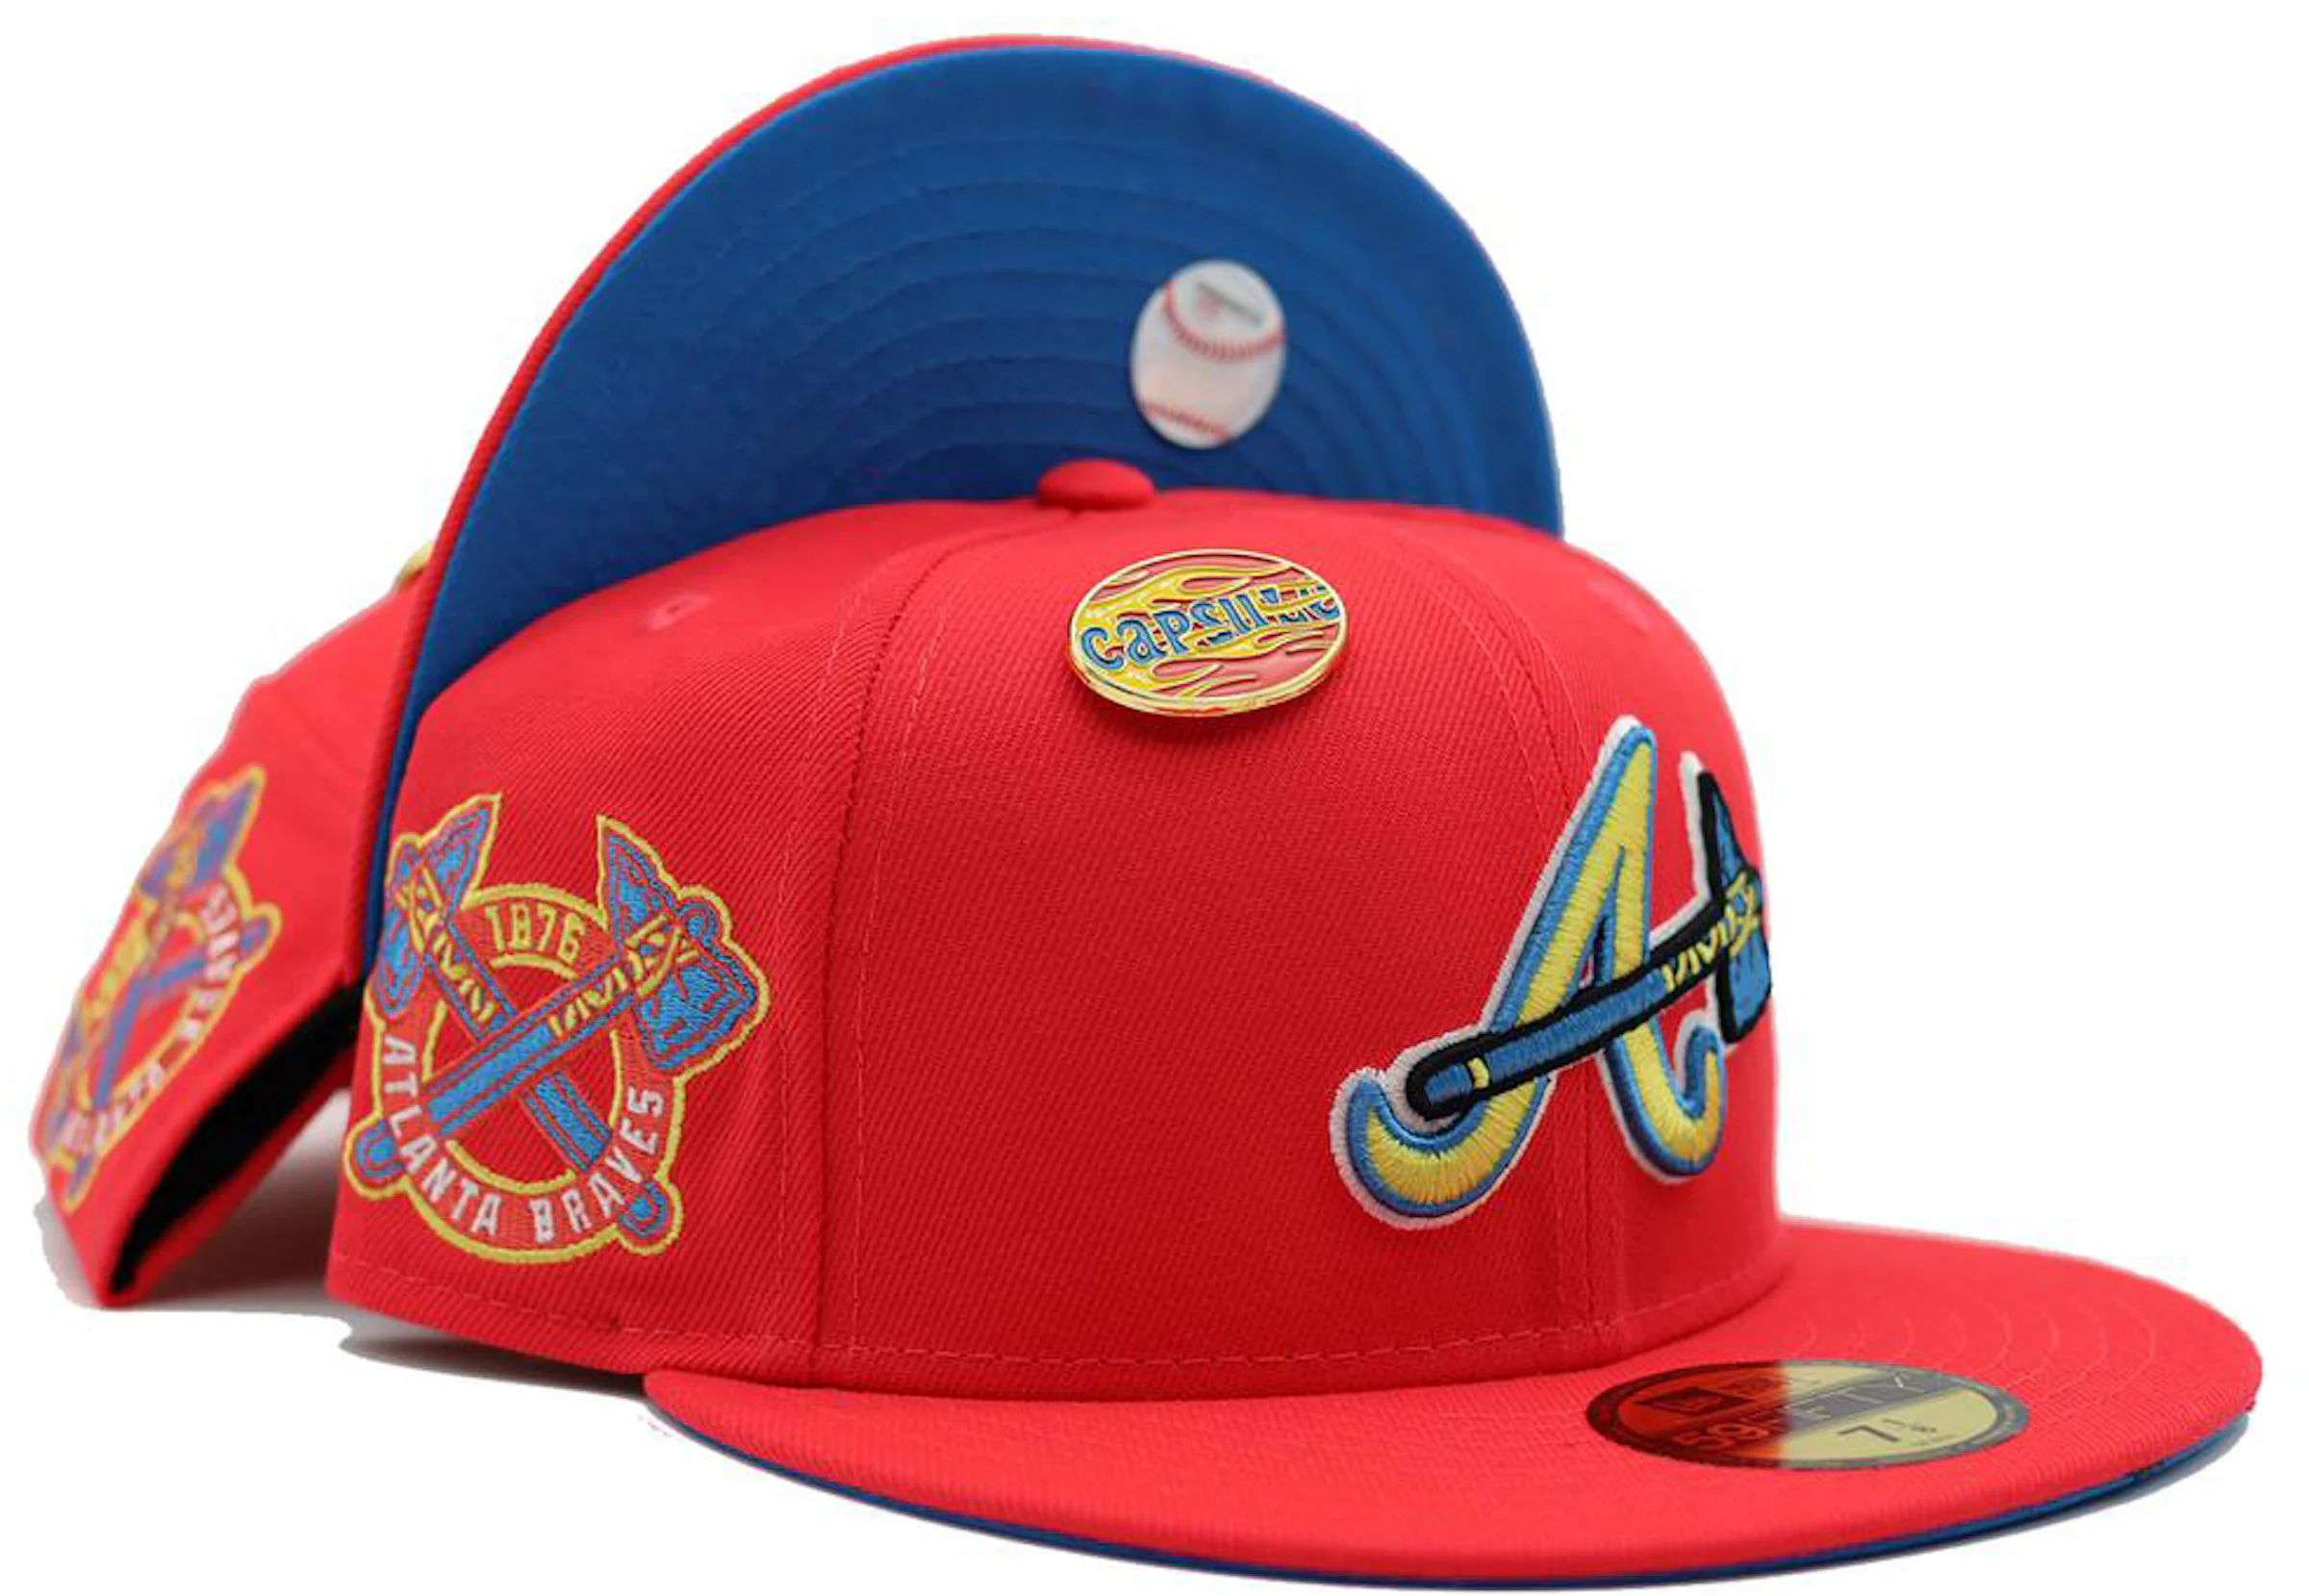 New Era Atlanta Braves Hot Rod Collection Tomahawk Pin Capsule Hats  Exclusive 59Fifty Fitted Hat Infrared/Blue